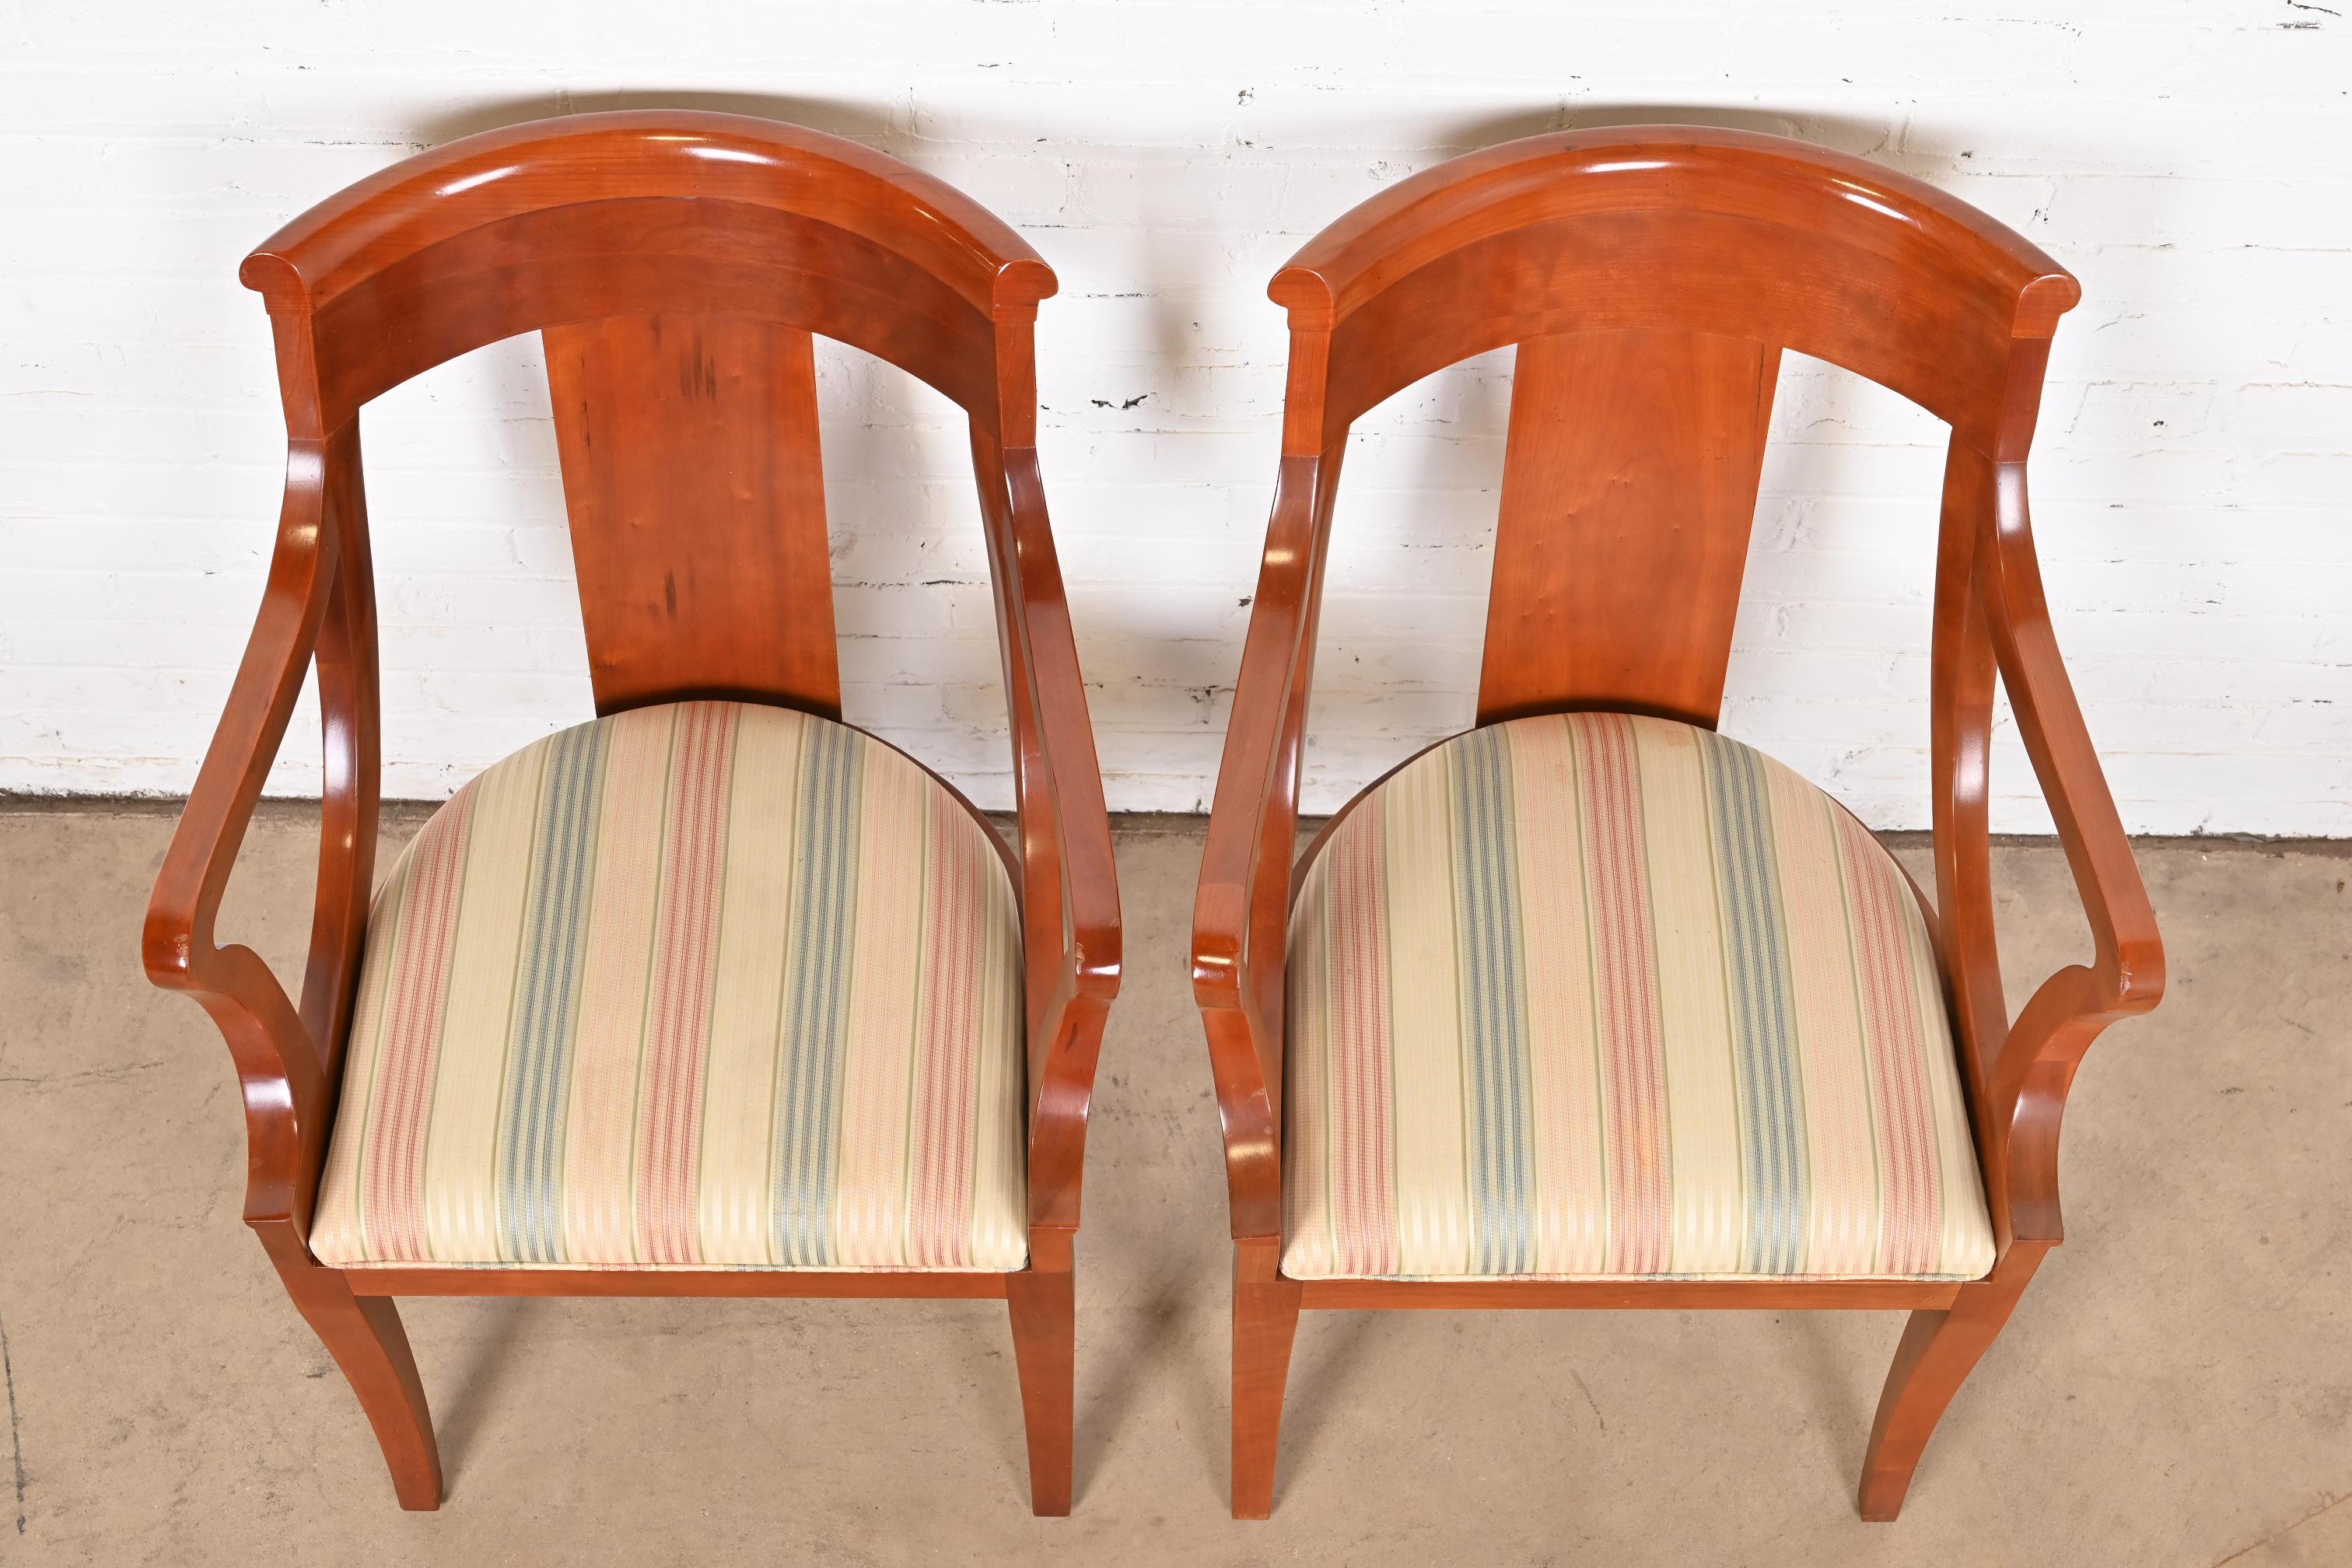 Baker Furniture Solid Cherry Wood Regency Arm Chairs, Pair For Sale 3